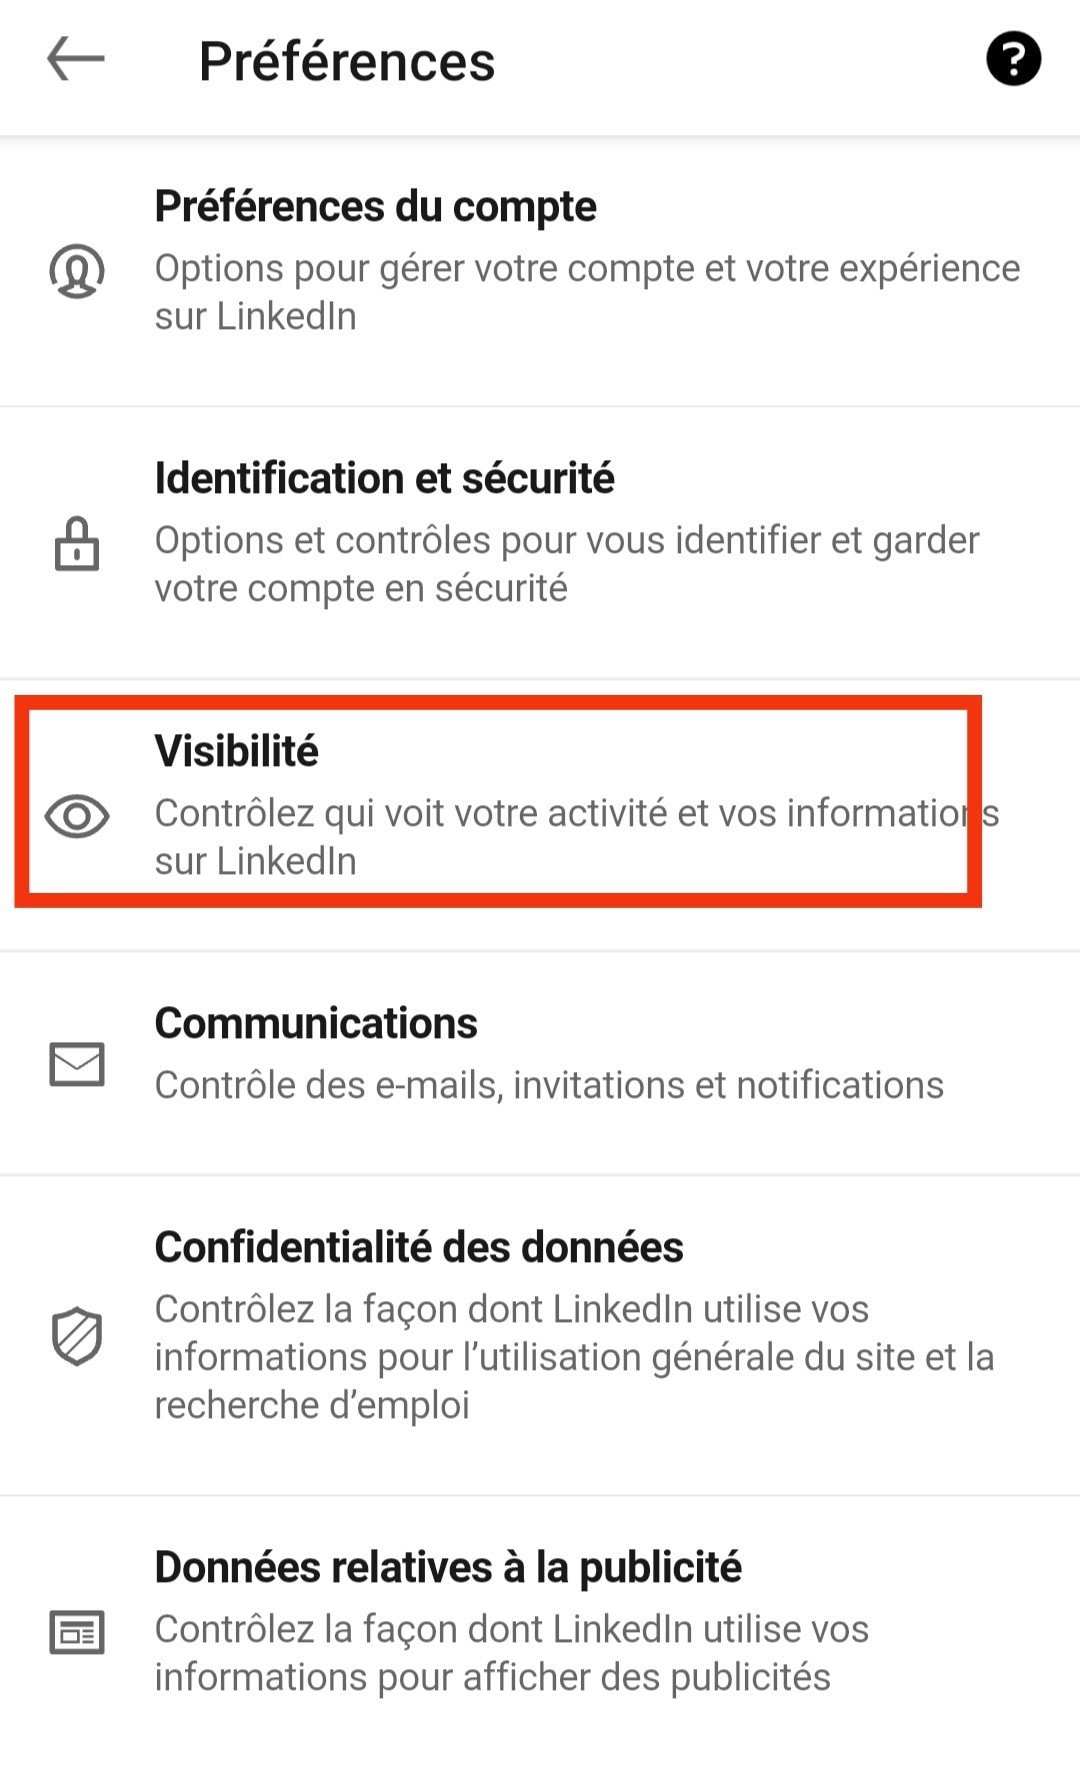 Visibility of your LinkedIn profile